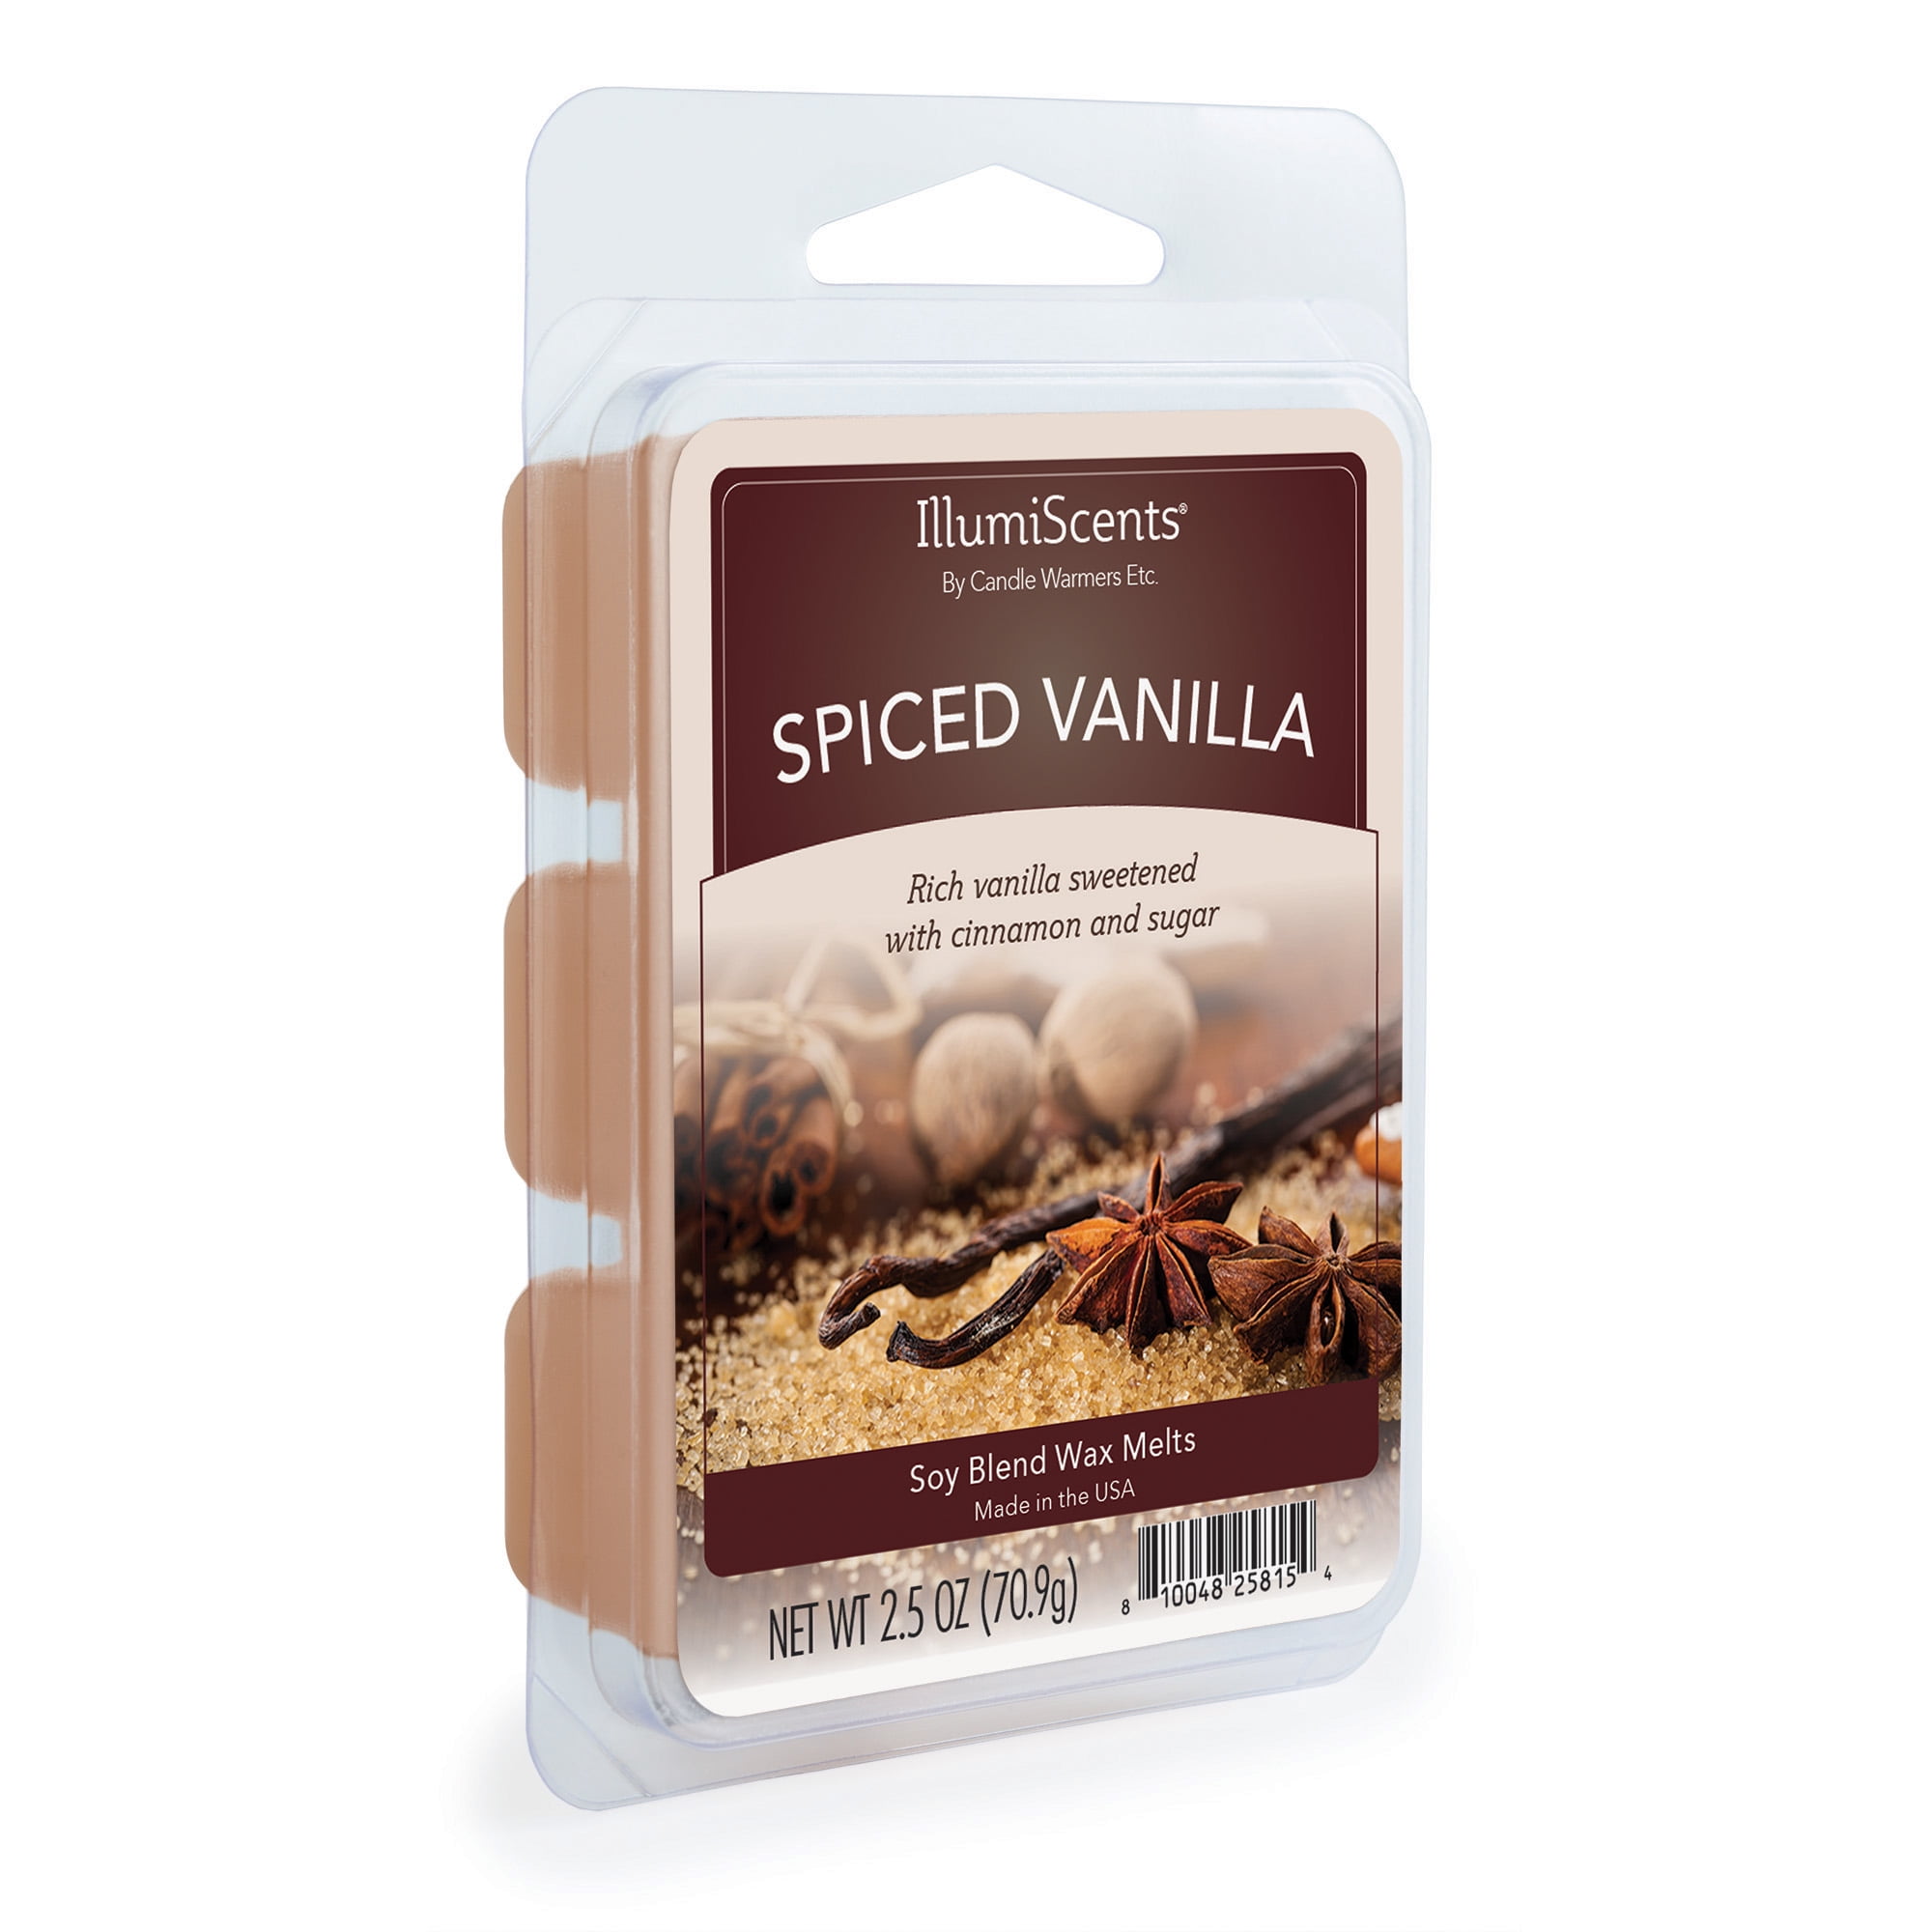 Vanilla Bean Wax Melts by Woodwick candles Food Spice